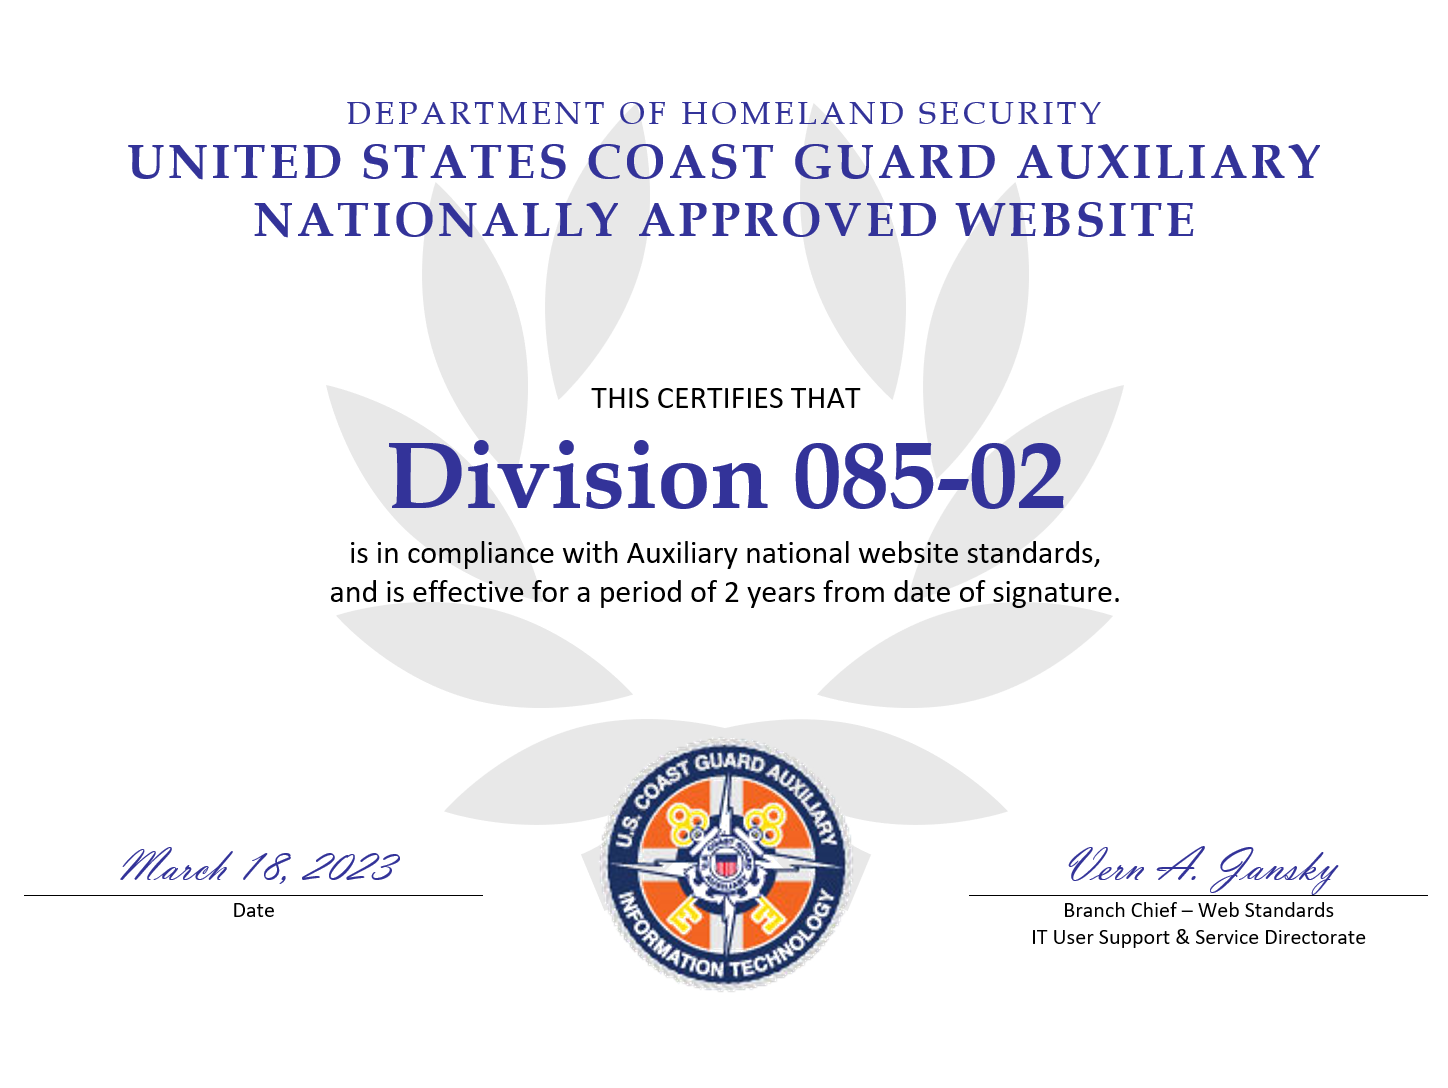 Nationally approved website certification March 2023